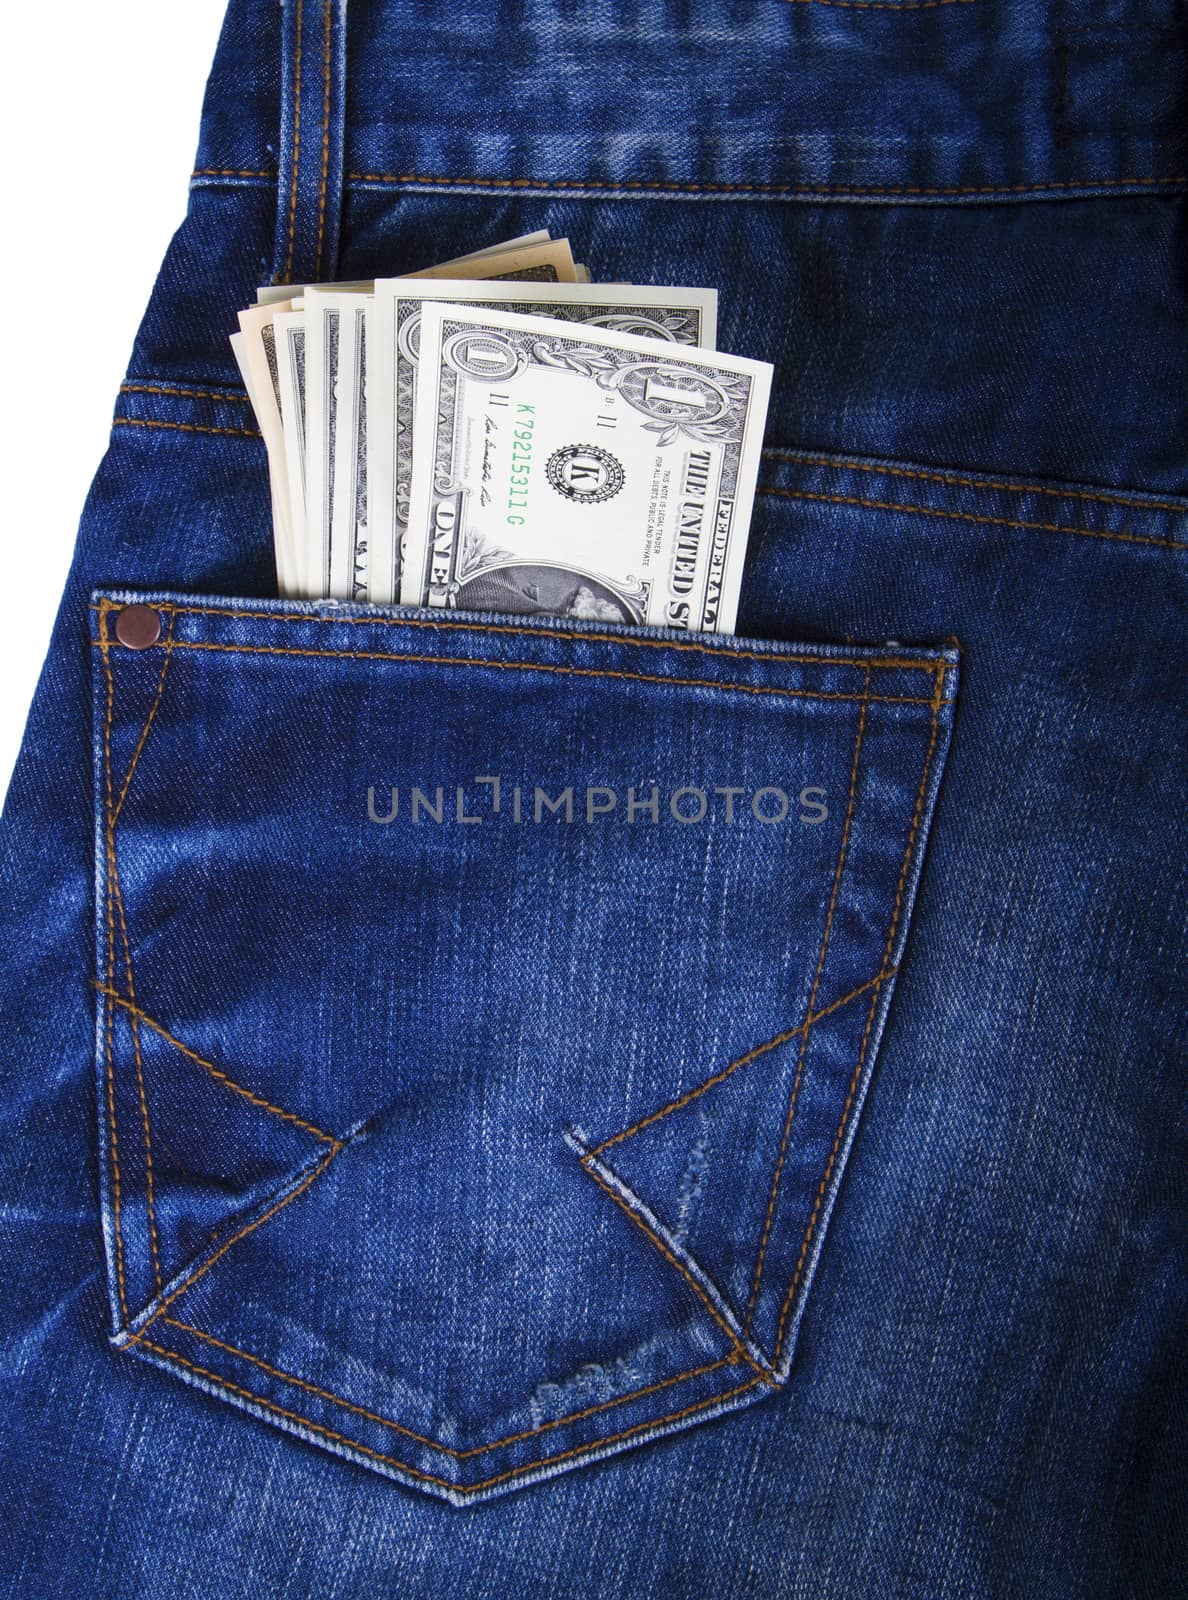 Dollar bill sticking out from a blue jean pocket